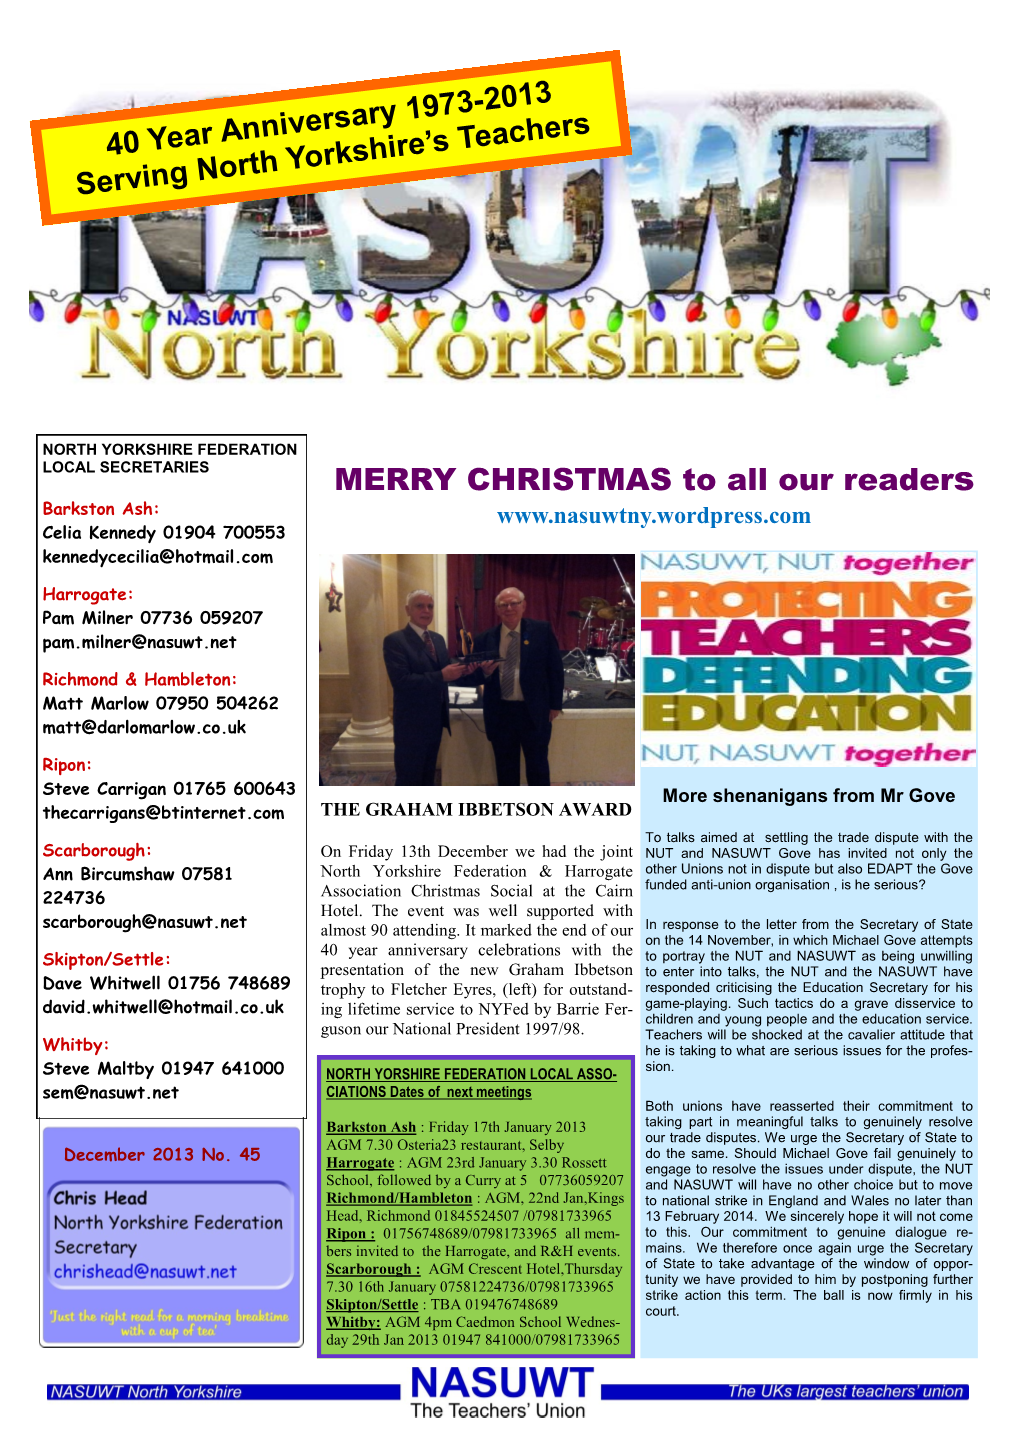 MERRY CHRISTMAS to All Our Readers 40 Year Anniversary 1973-2013 Serving North Yorkshire's Teachers